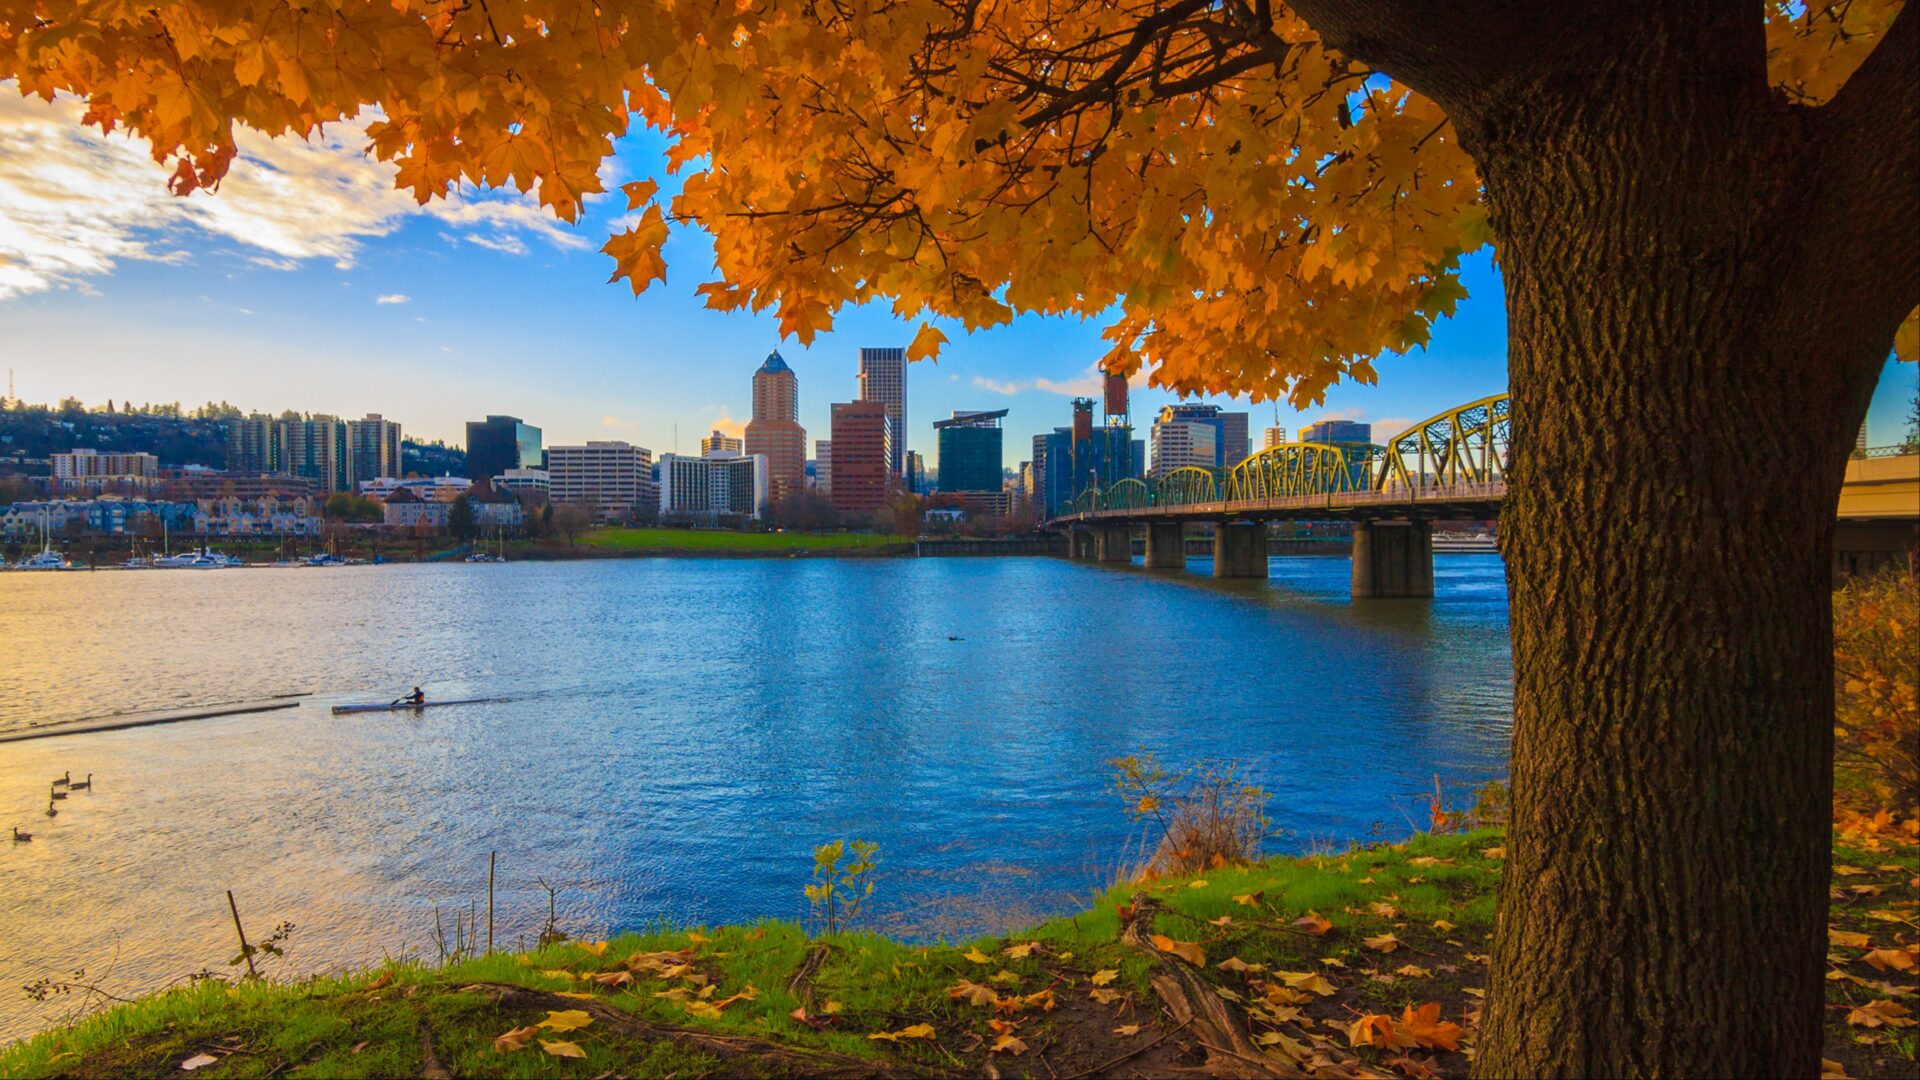 Ready to Explore Portland? Here are 25+ Unmissable Things to Do (+5 to Beware Of)